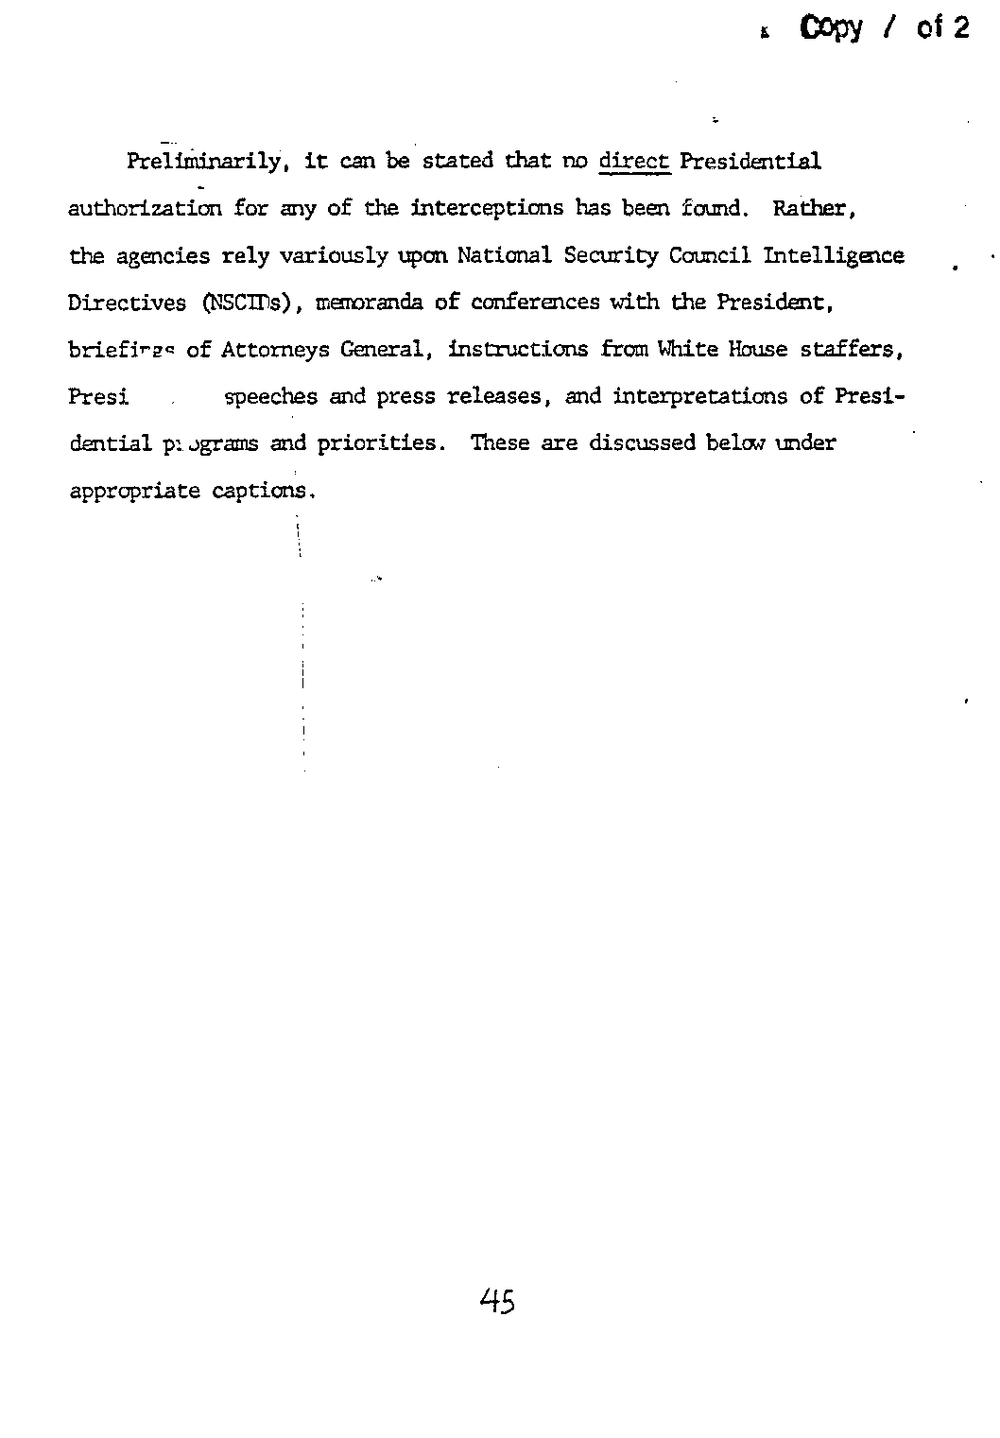 Page 53 from Report on Inquiry Into CIA Related Electronic Surveillance Activities